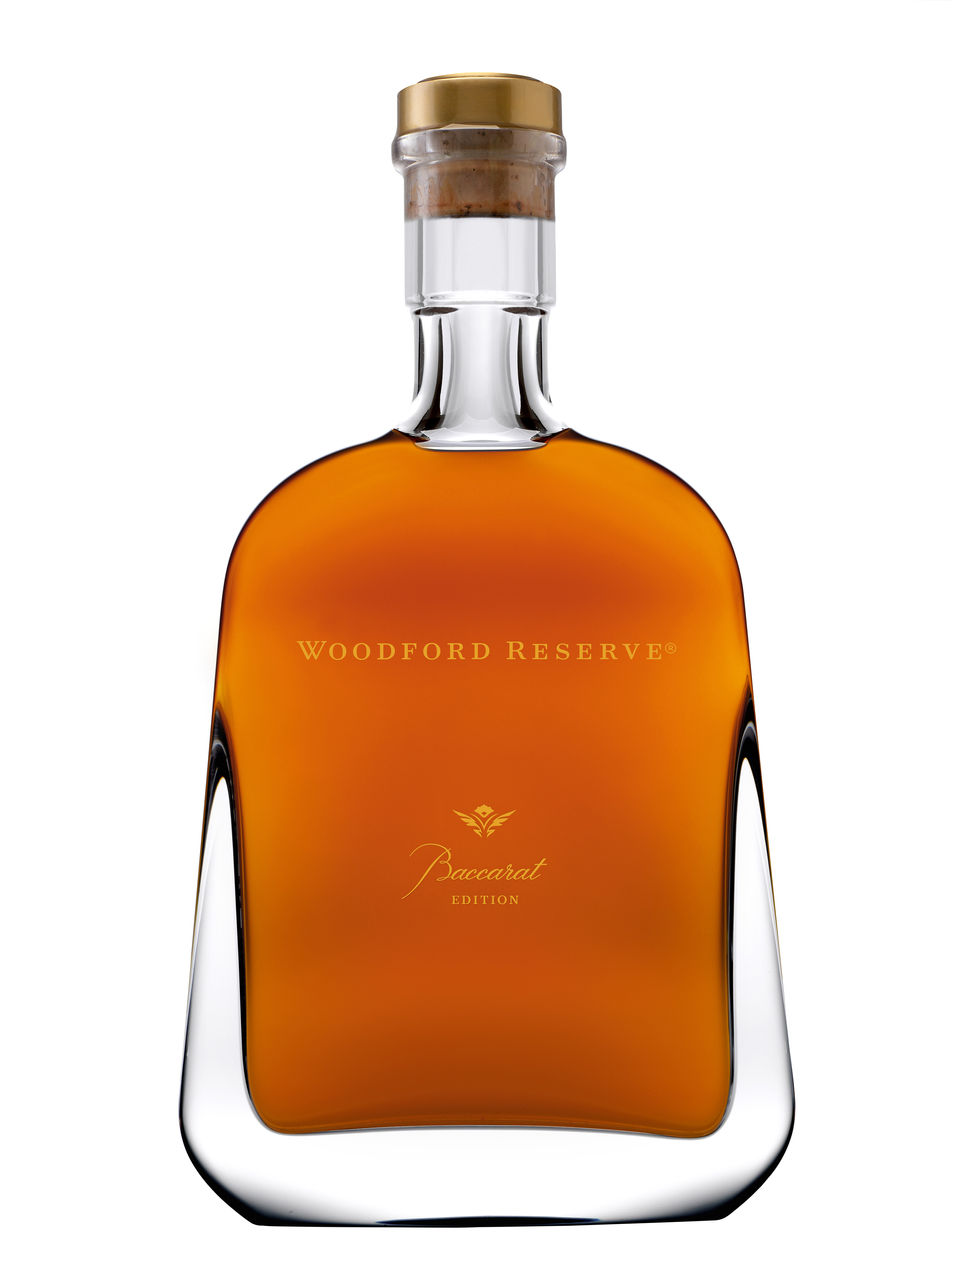 Woodford Reserve Baccarat Edition Kentucky Straight Bourbon Whiskey | LCBO